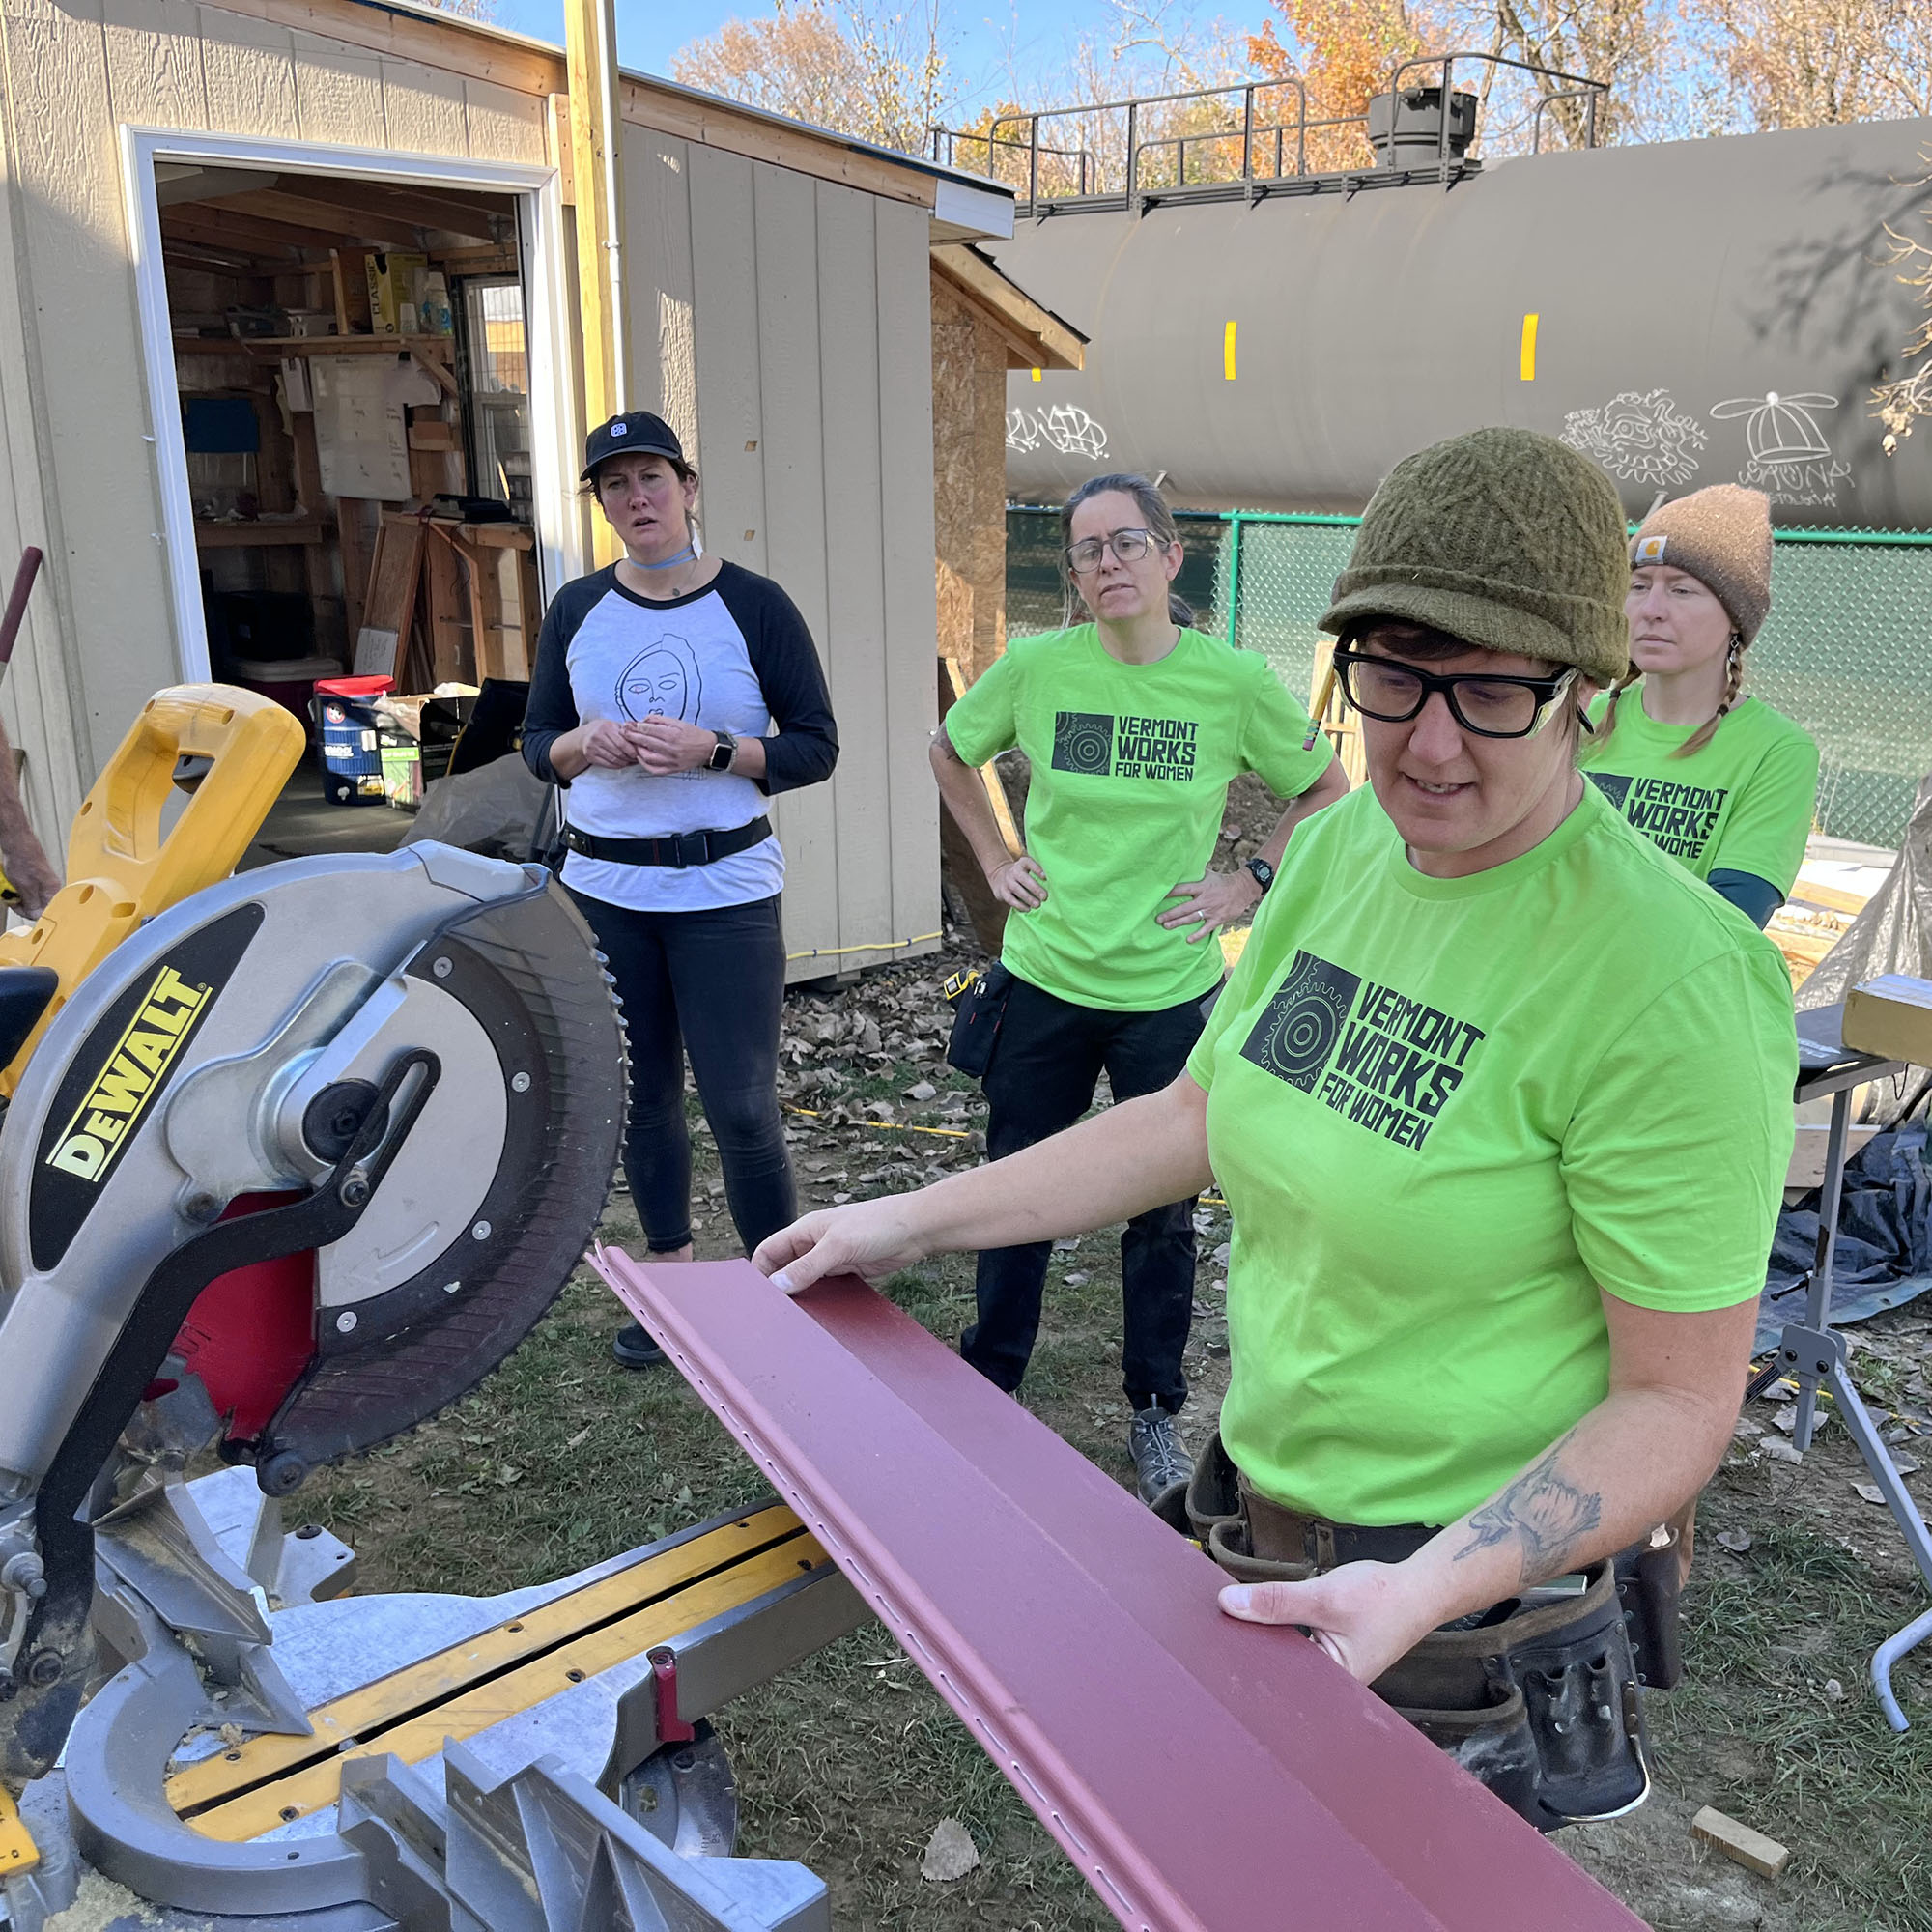 The Trailblazers program instructor places a piece of home siding onto a chop saw outside at a build project. Community impact is part of Trailblazers' program model.